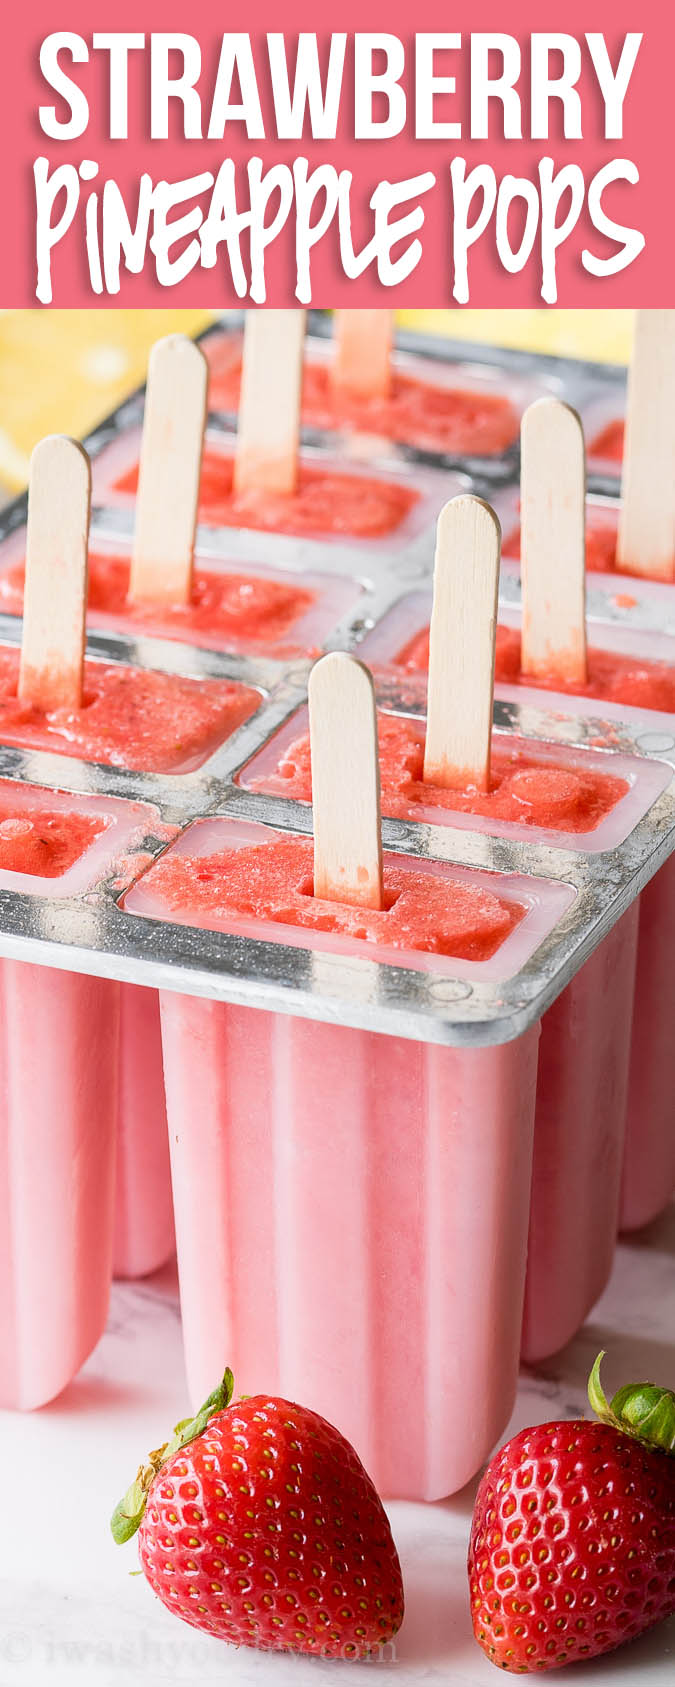 These cool and refreshing Strawberry Pineapple Popsicles are and easy treat you can feel good about enjoying!